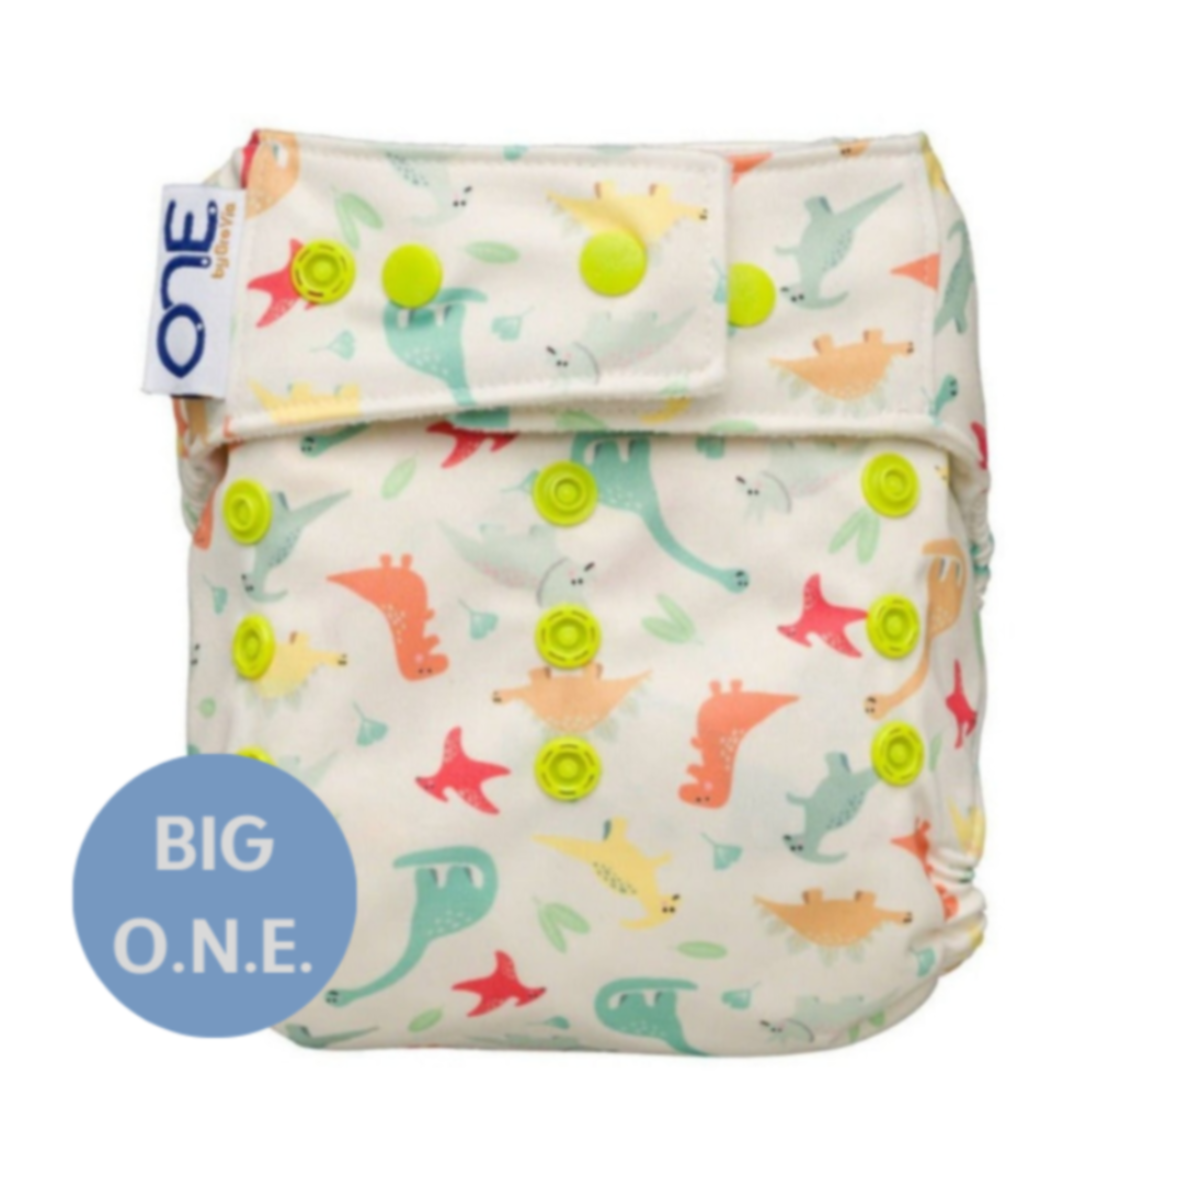  Big O.N.E. Cloth Diaper - Relic with colorful dinosaurs on a white background. 